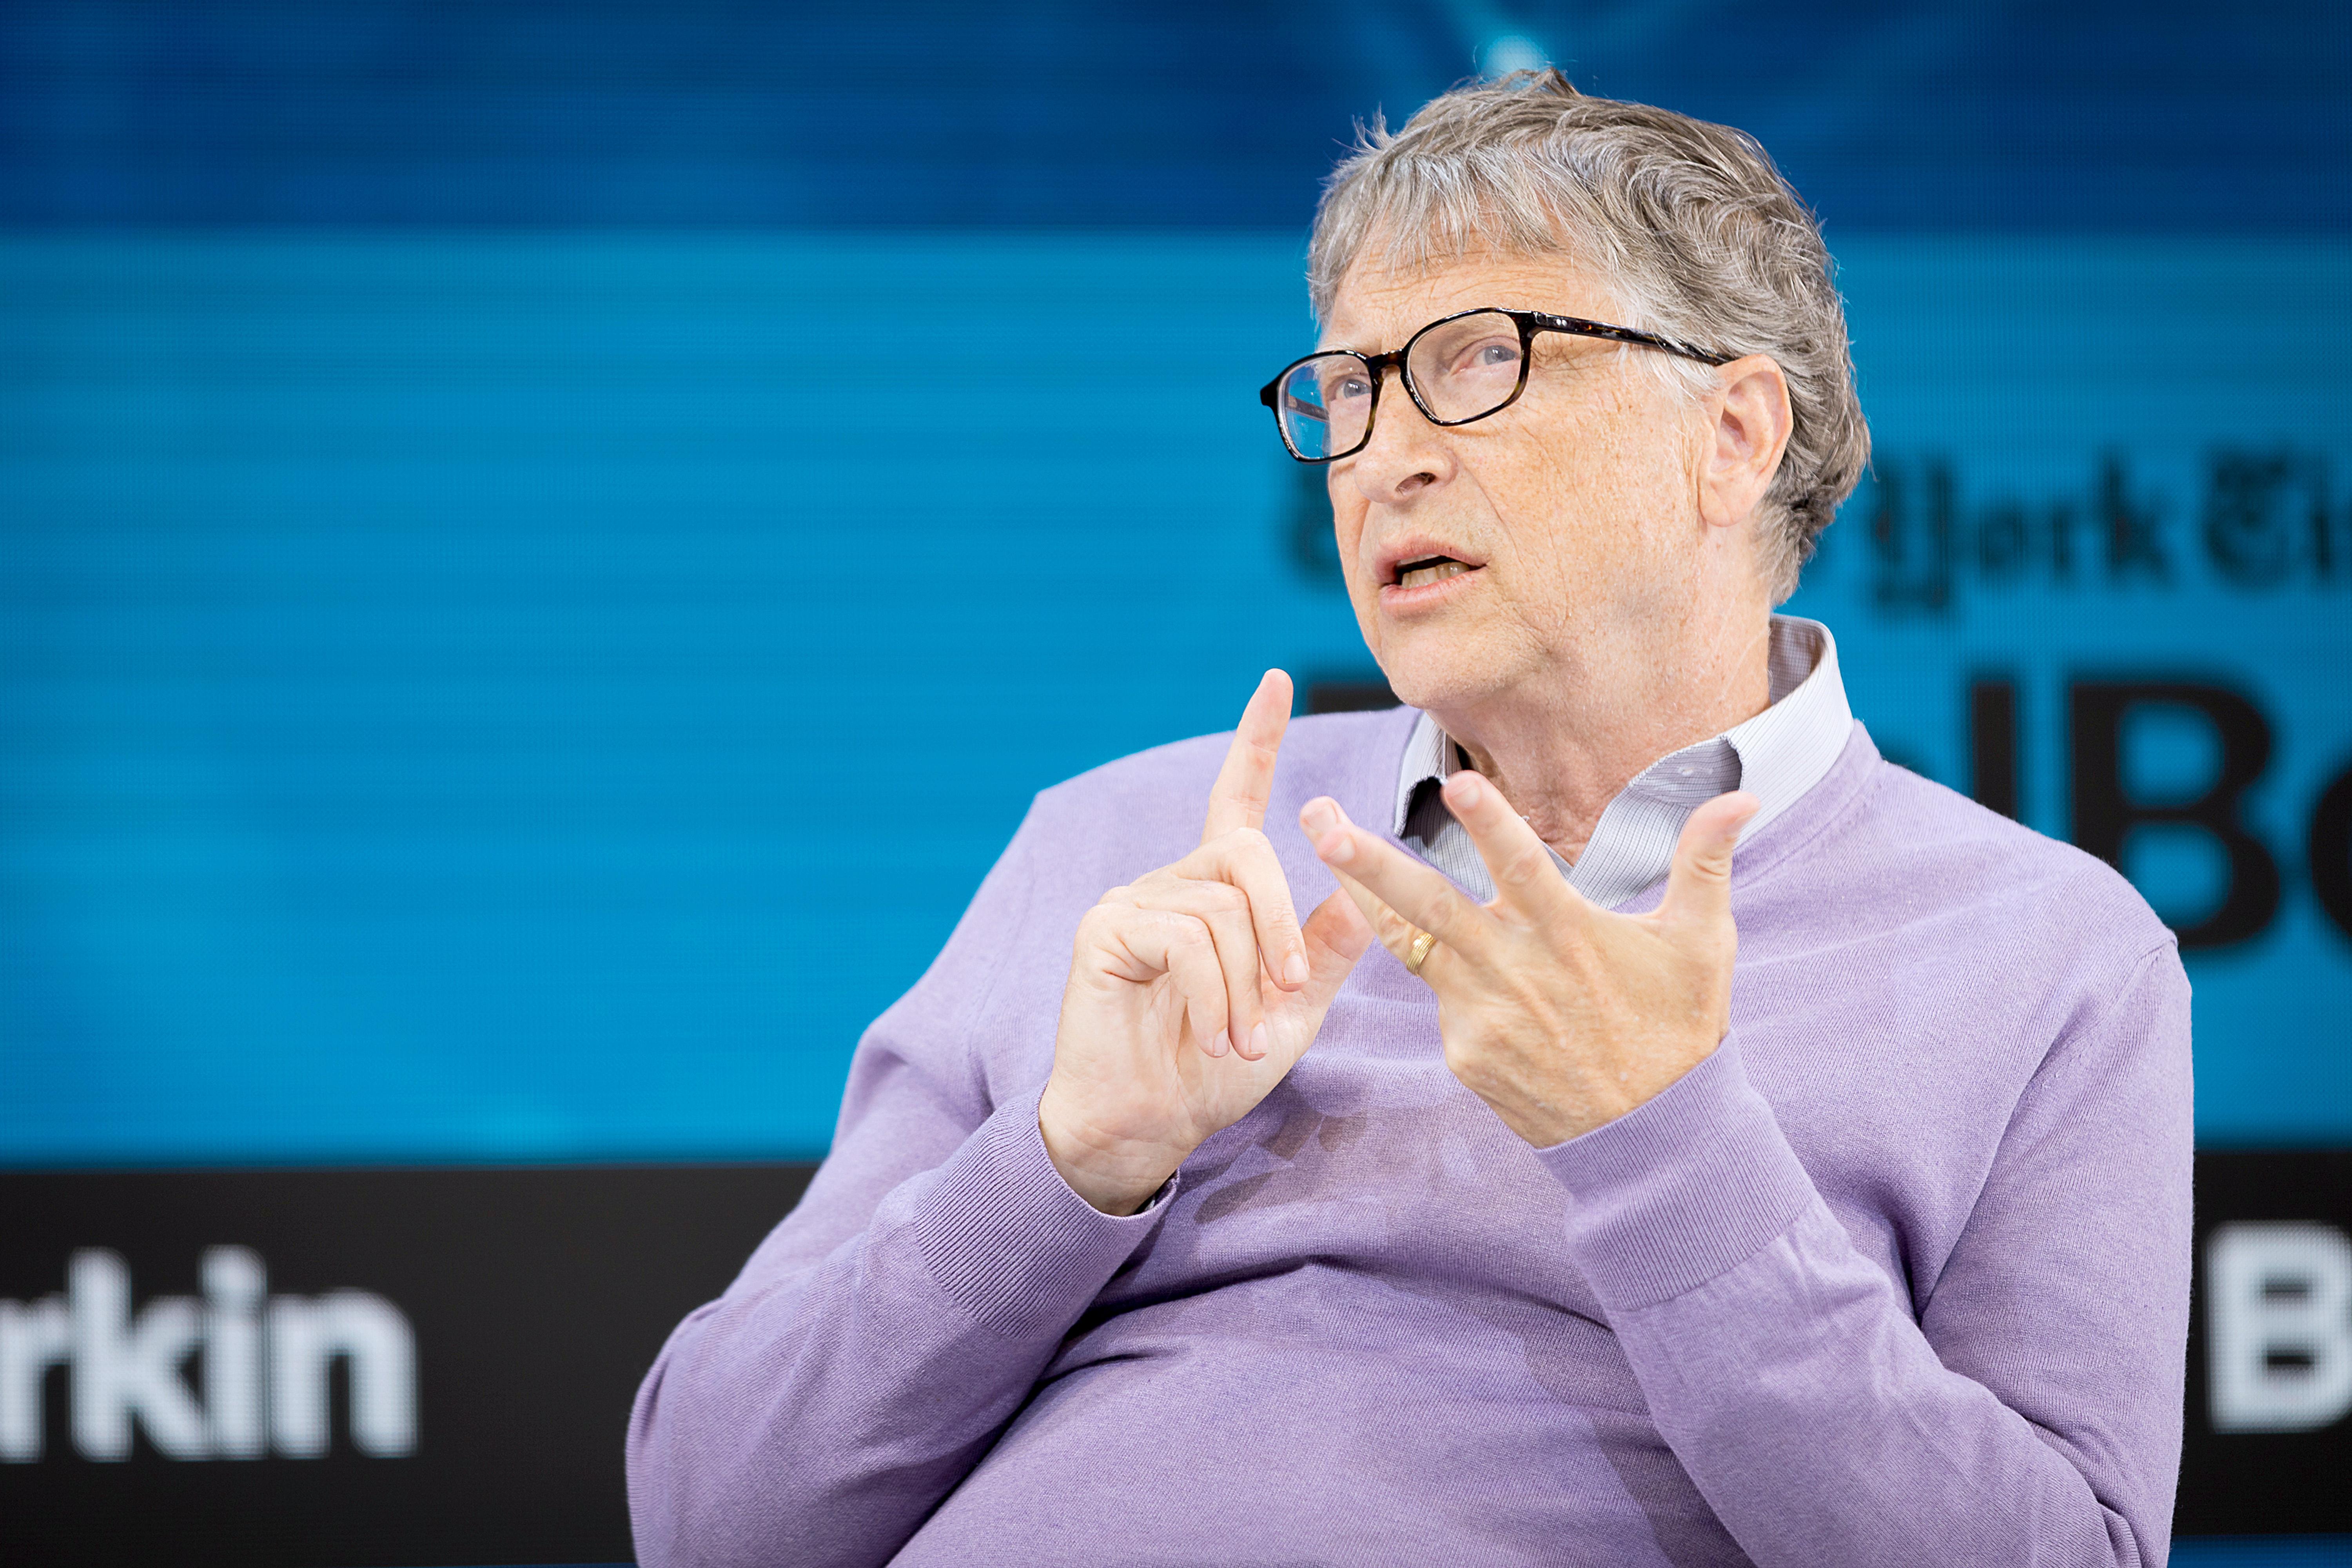 NEW YORK, NEW YORK - NOVEMBER 06: Bill Gates, Co-Chair, Bill & Melinda Gates Foundation speaks onstage at 2019 New York Times Dealbook on November 06, 2019 in New York City. (Photo by Michael Cohen/Getty Images for The New York Times)